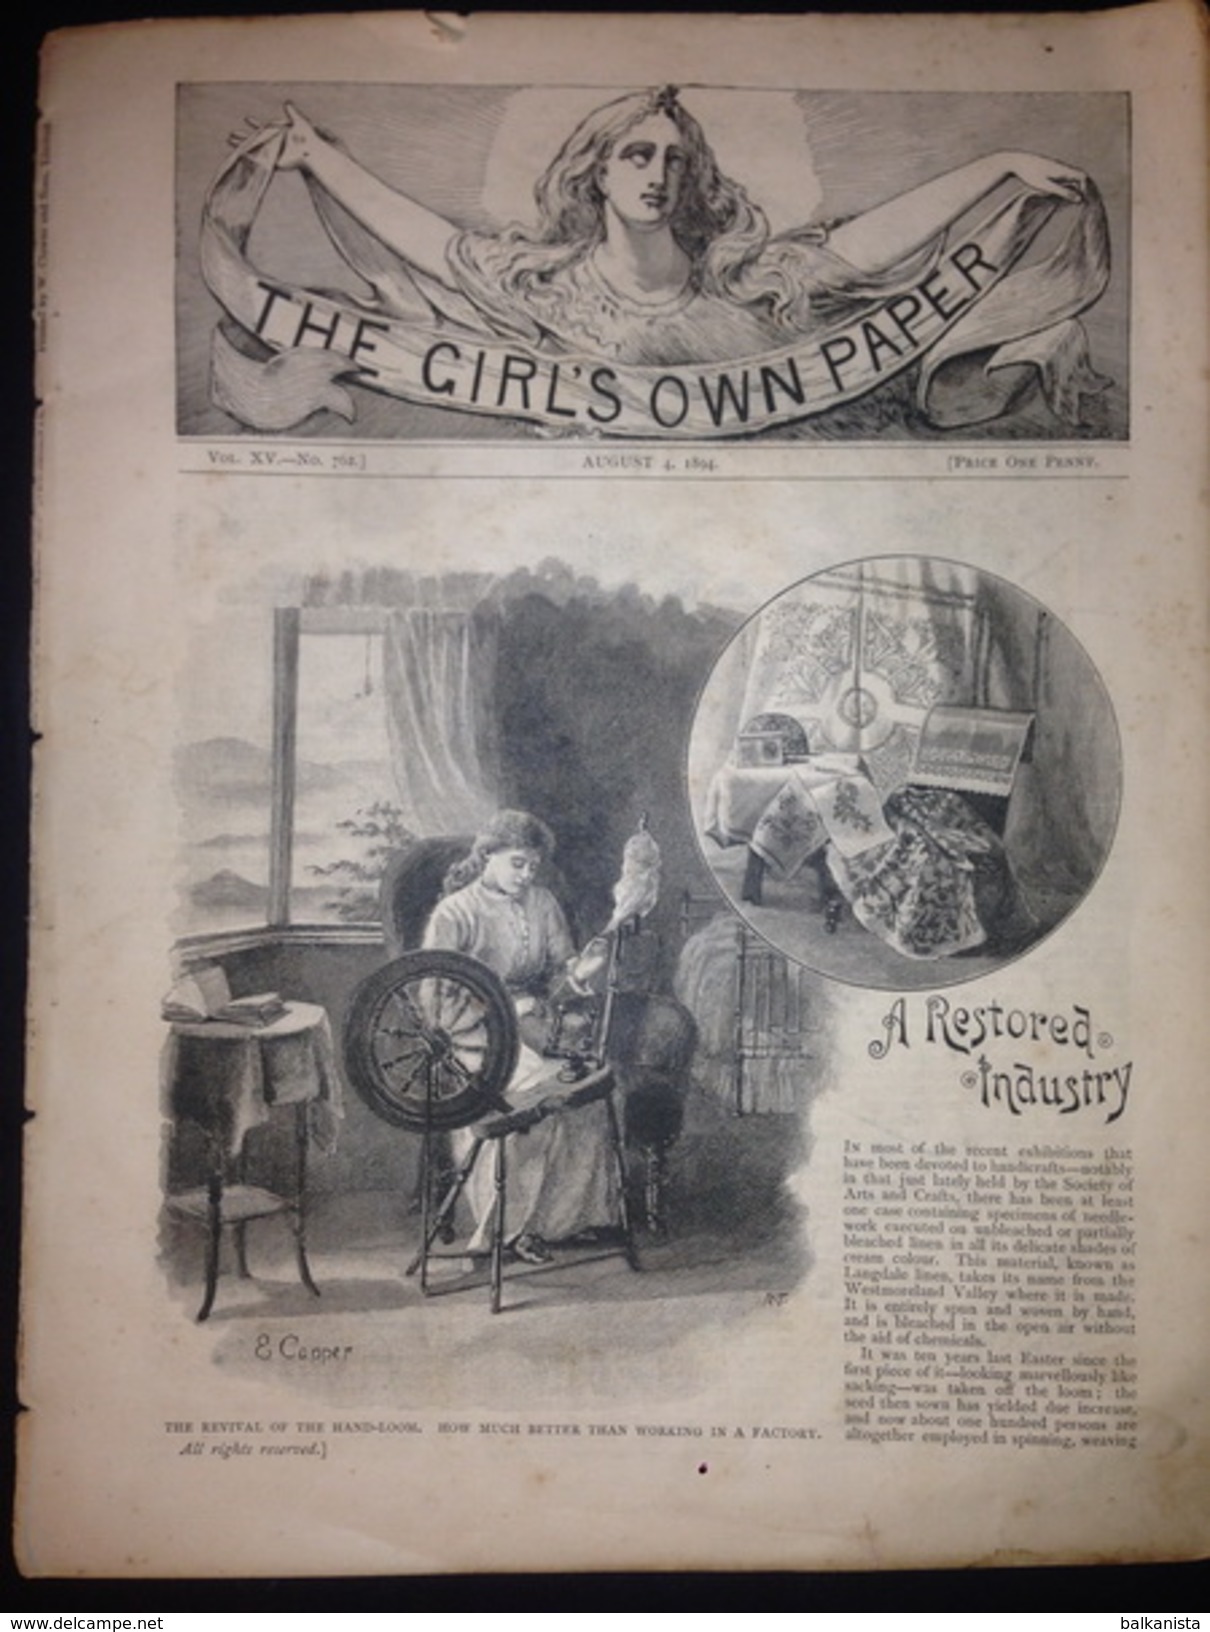 The Girl's Own Paper August 4, 1894 No: 762 - Para Mujeres